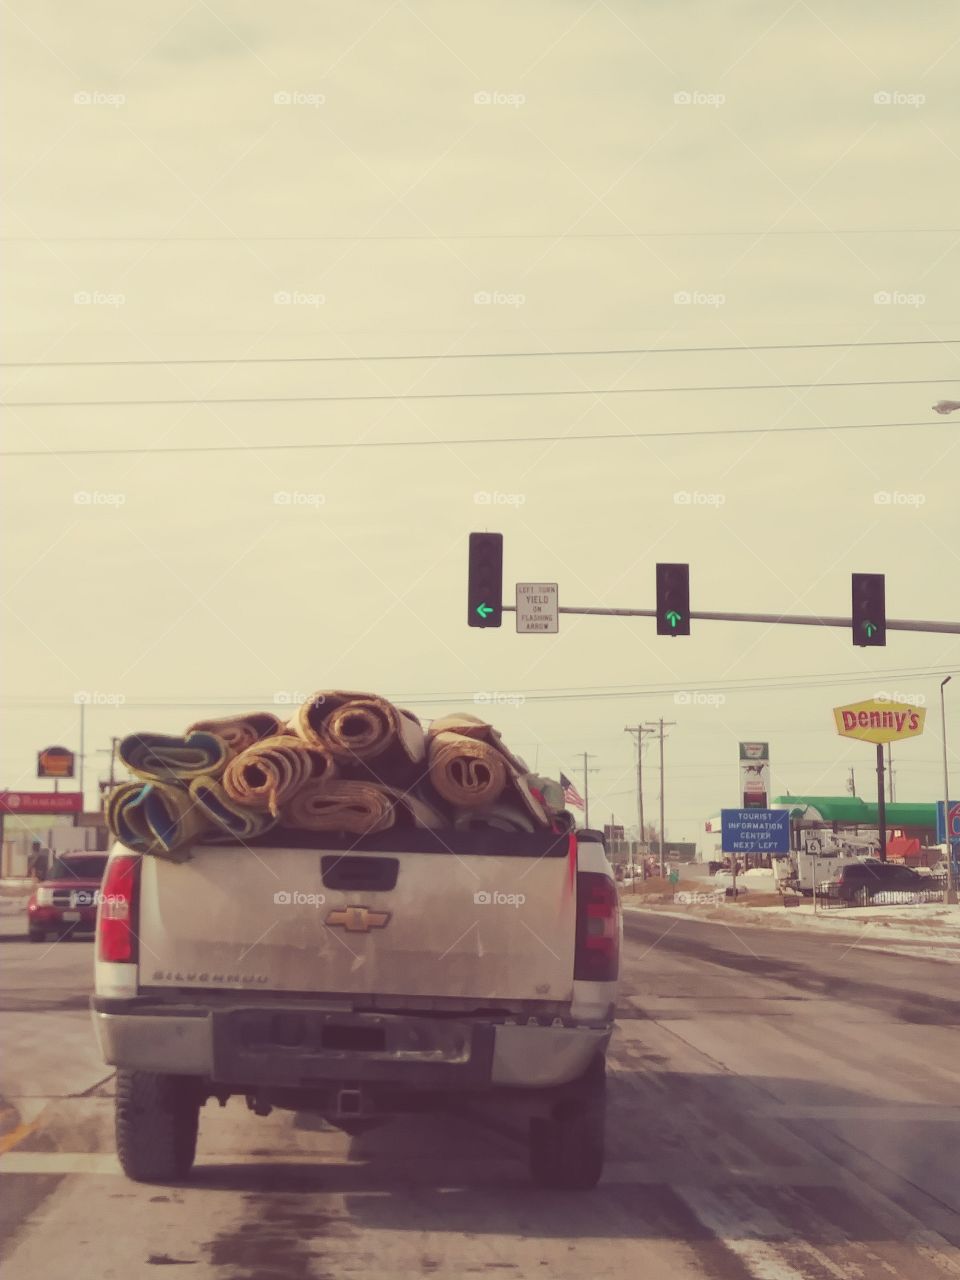 traveling through NOrth West and see this pick-up truck filled over the top of bed with rolls and rolls of carpet. white truck is coming up on a green light.